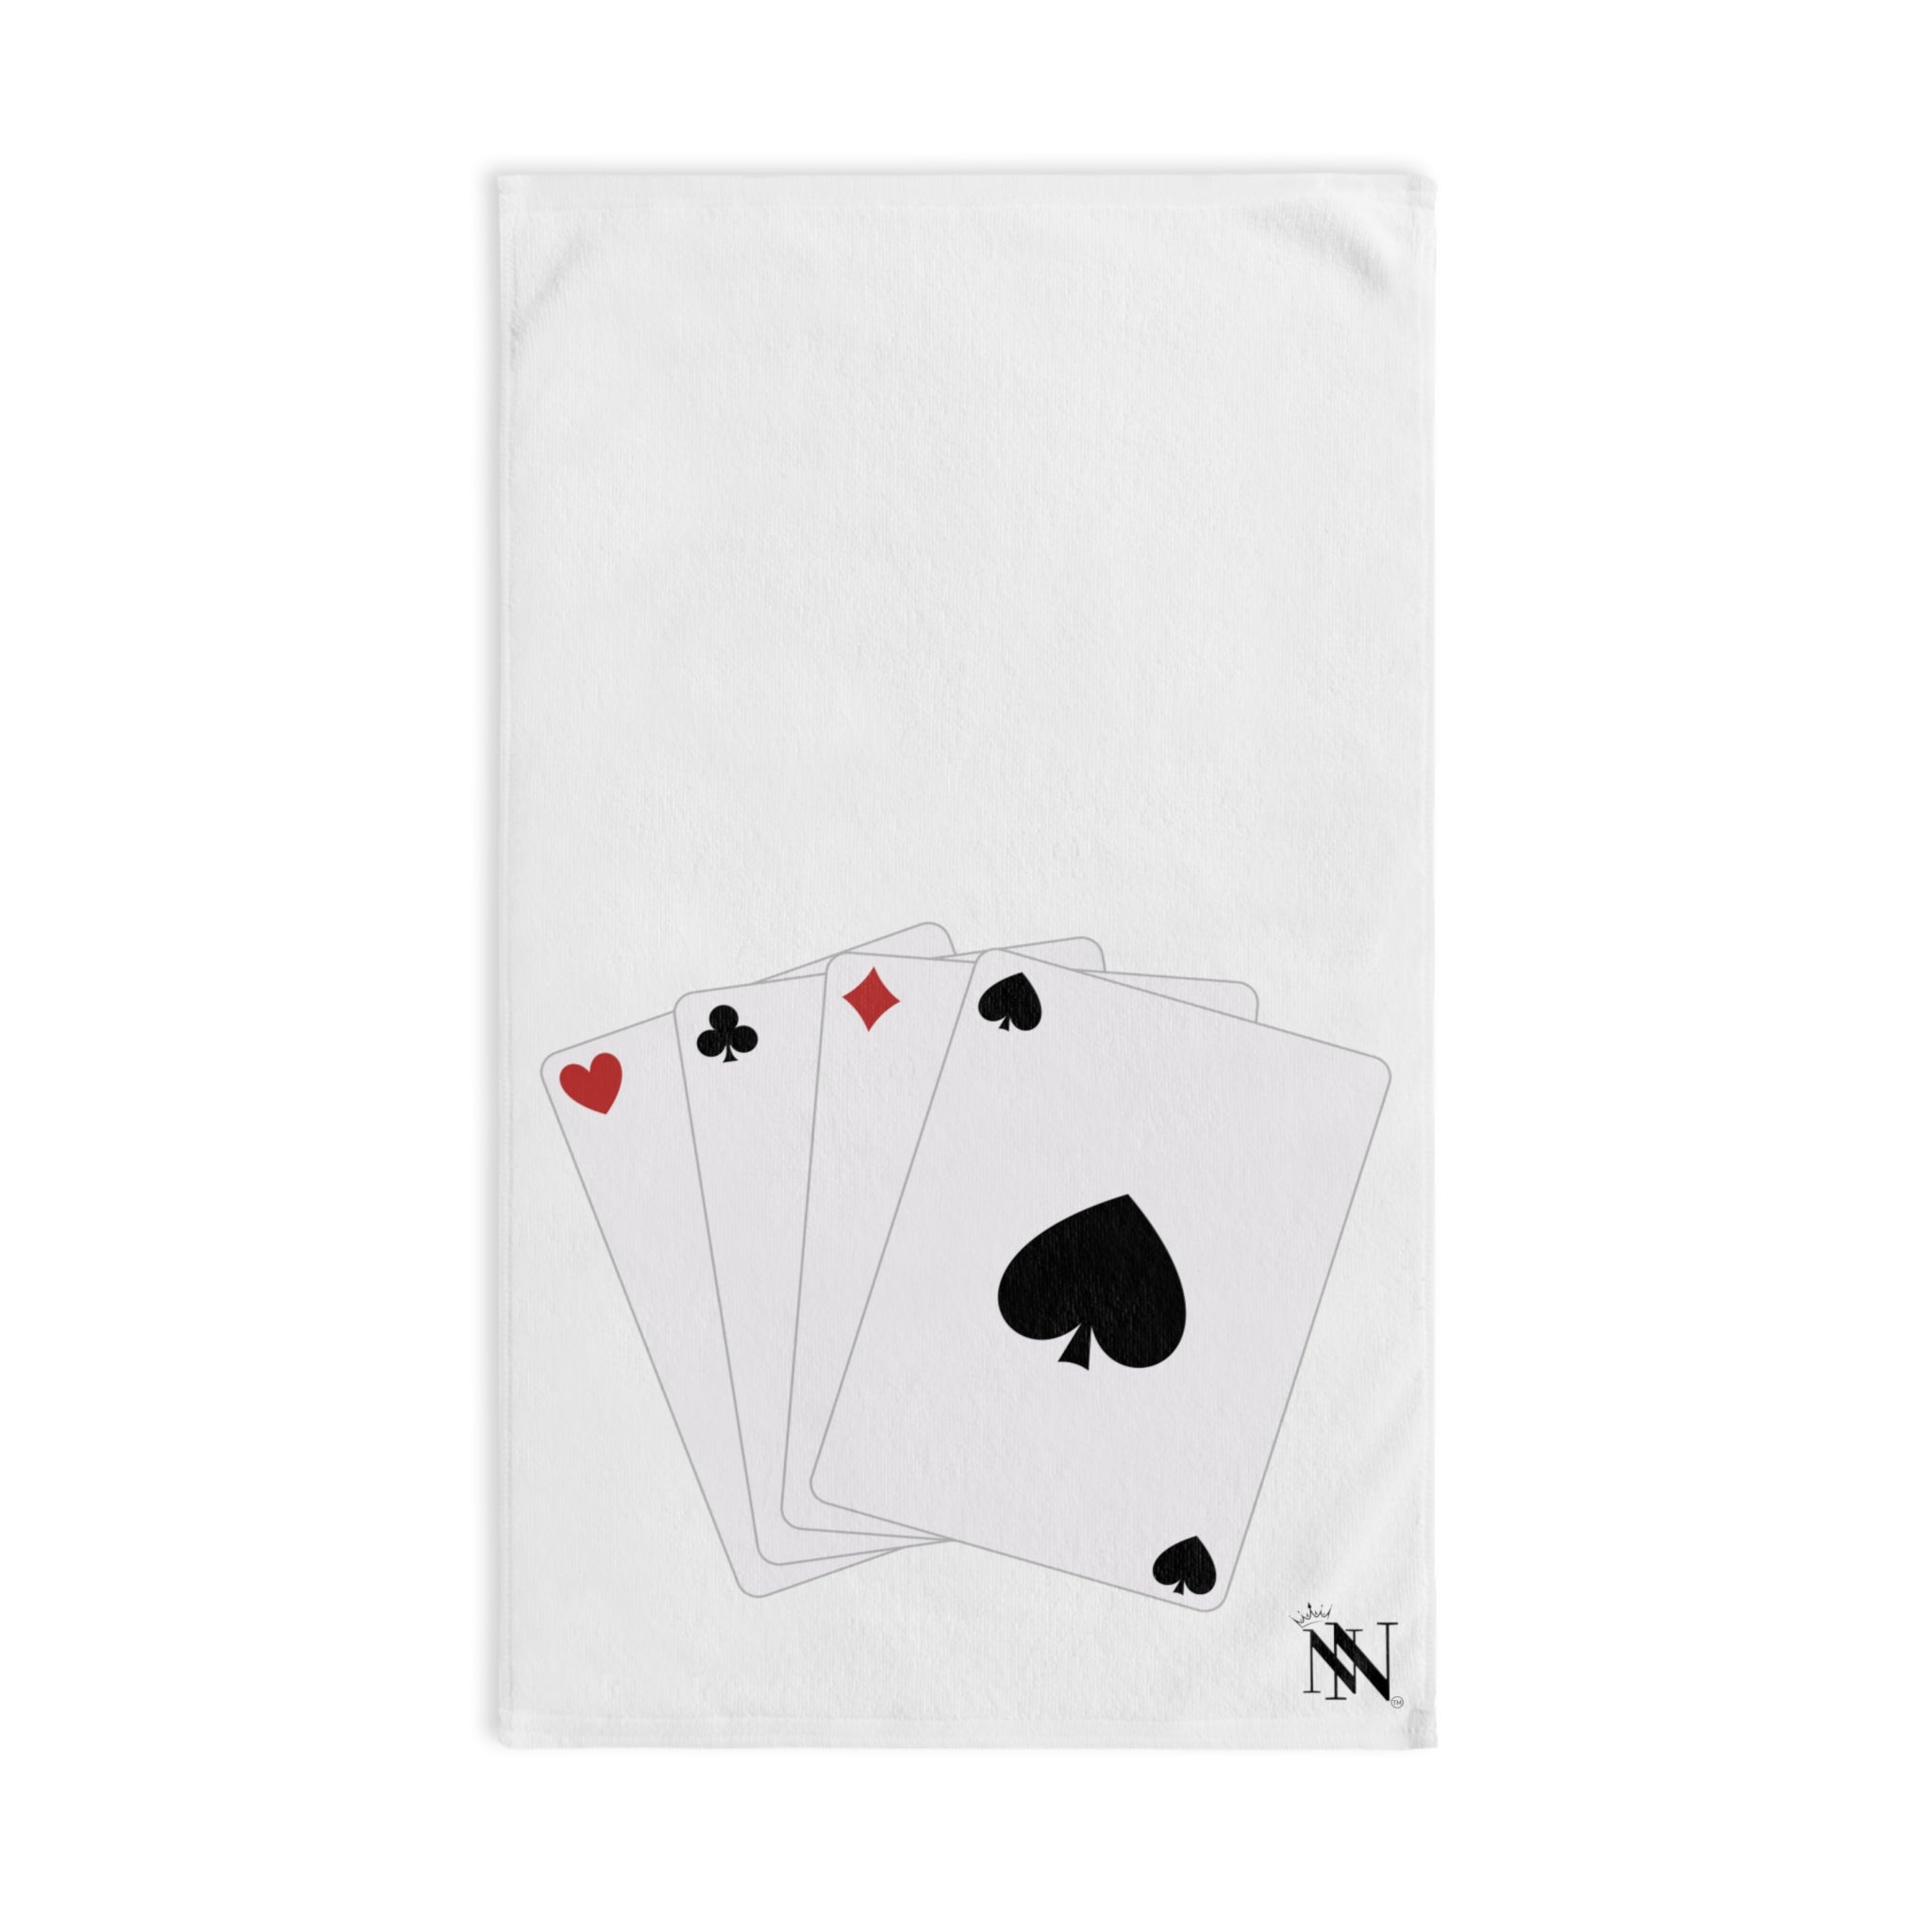 Card Luck Hand White | Funny Gifts for Men - Gifts for Him - Birthday Gifts for Men, Him, Her, Husband, Boyfriend, Girlfriend, New Couple Gifts, Fathers & Valentines Day Gifts, Christmas Gifts NECTAR NAPKINS